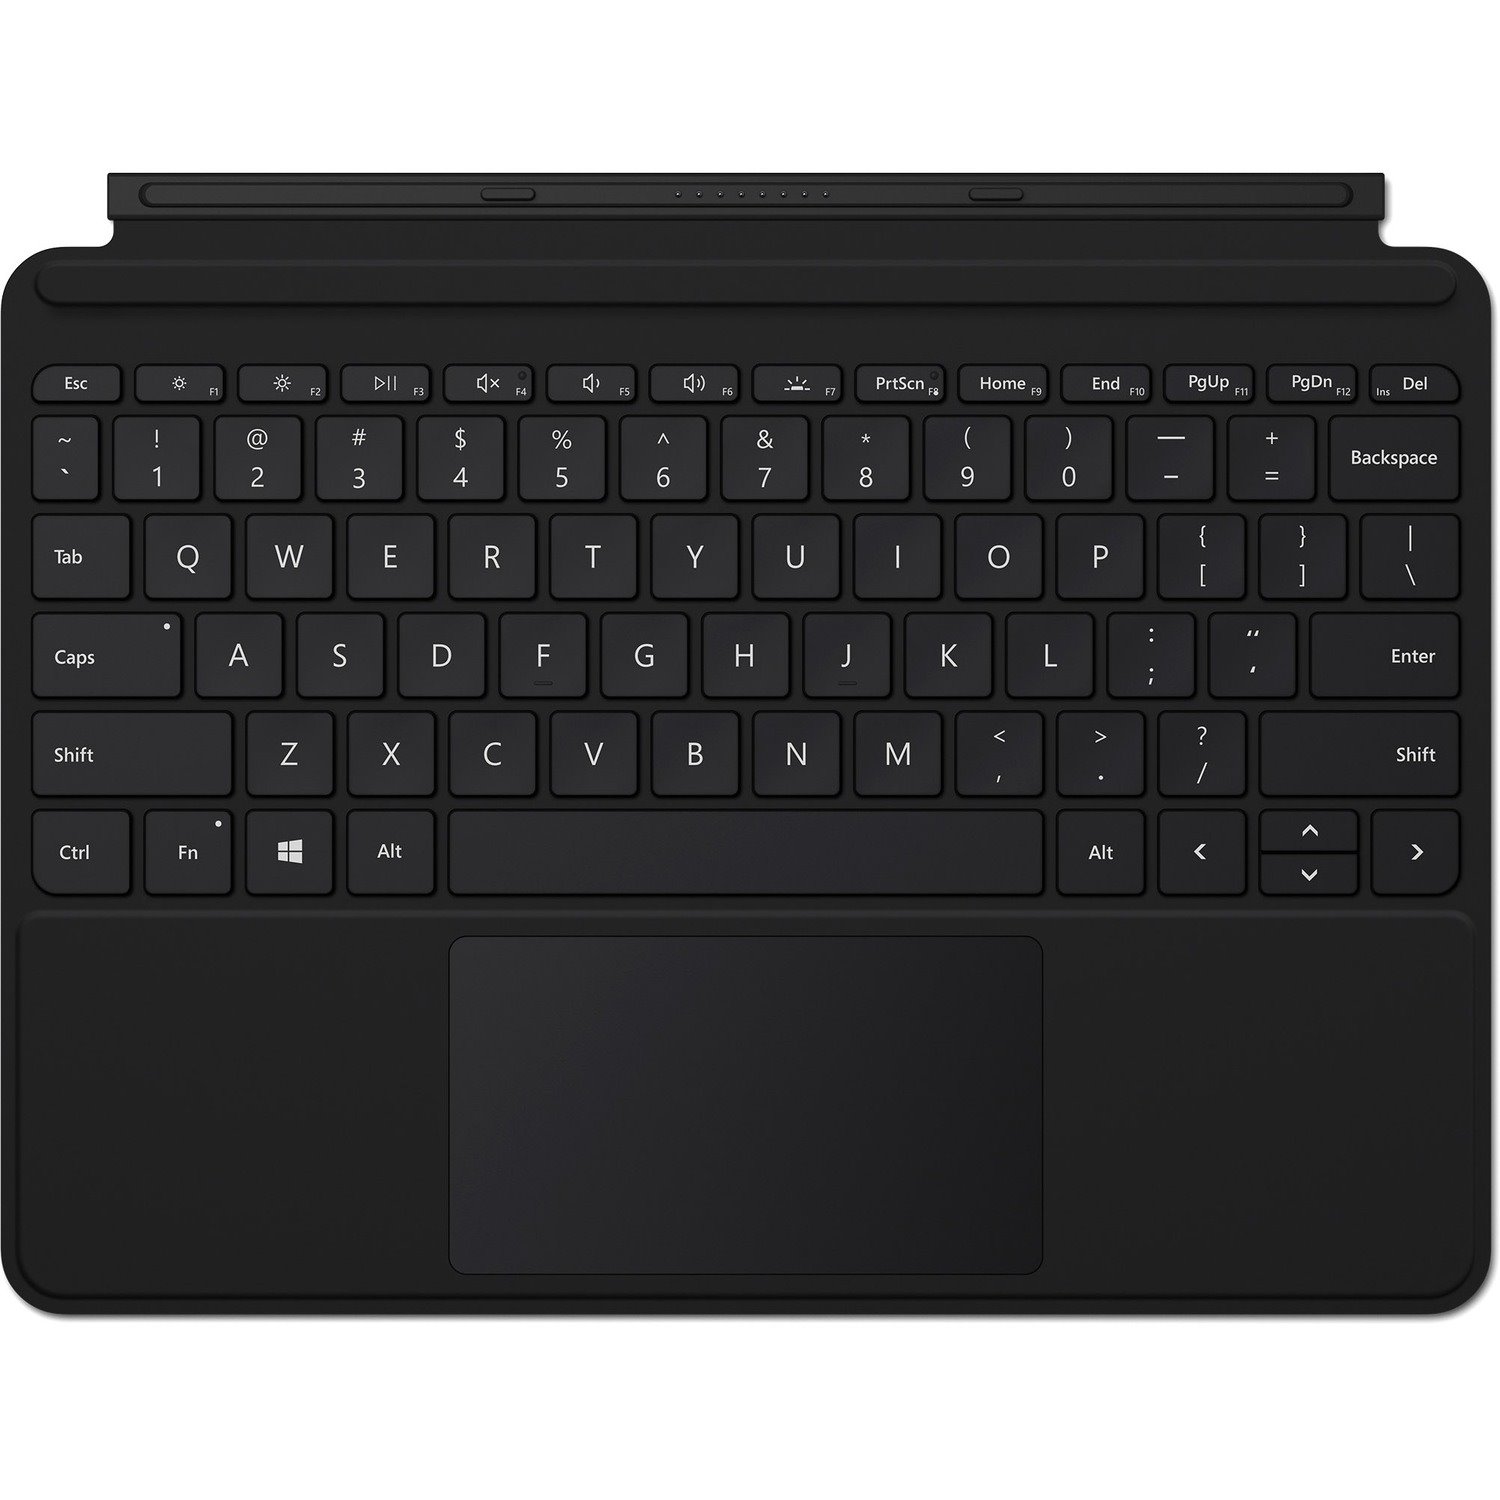 Microsoft Type Cover Keyboard/Cover Case Microsoft Surface Go, Surface Go 2, Surface Go 3 Tablet - Black